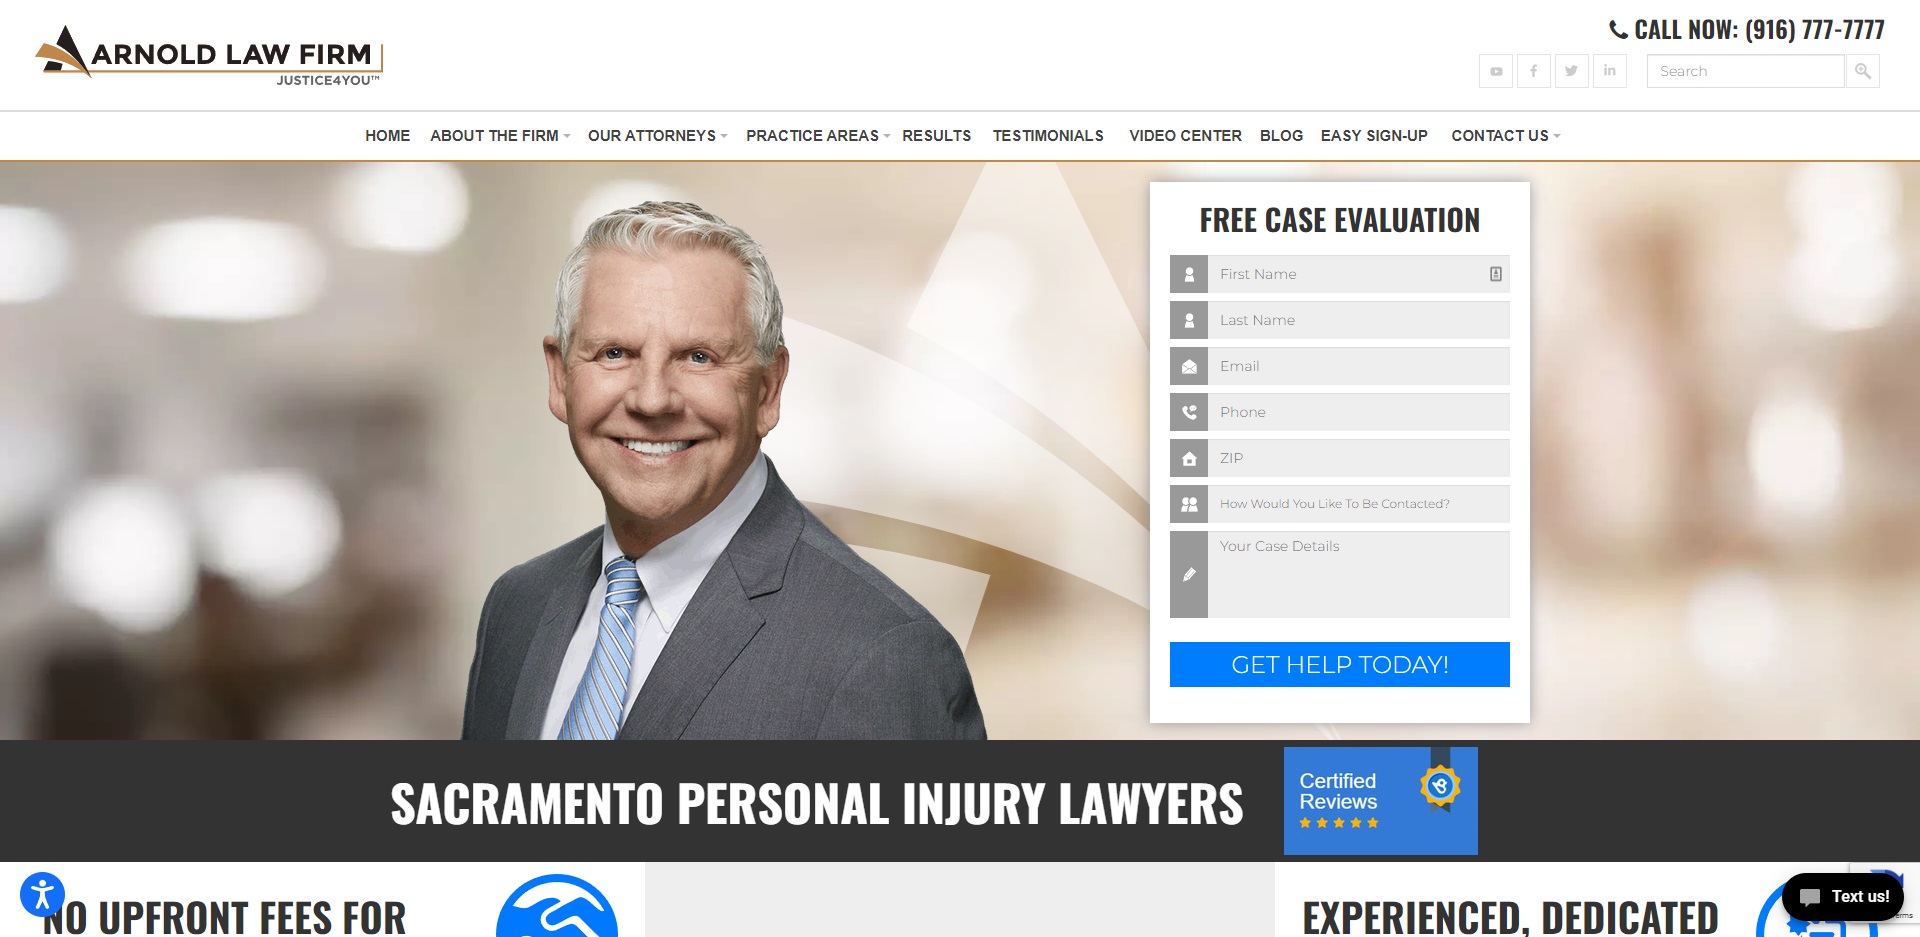 The Best Constitutional Law Attorneys in Sacramento, CA